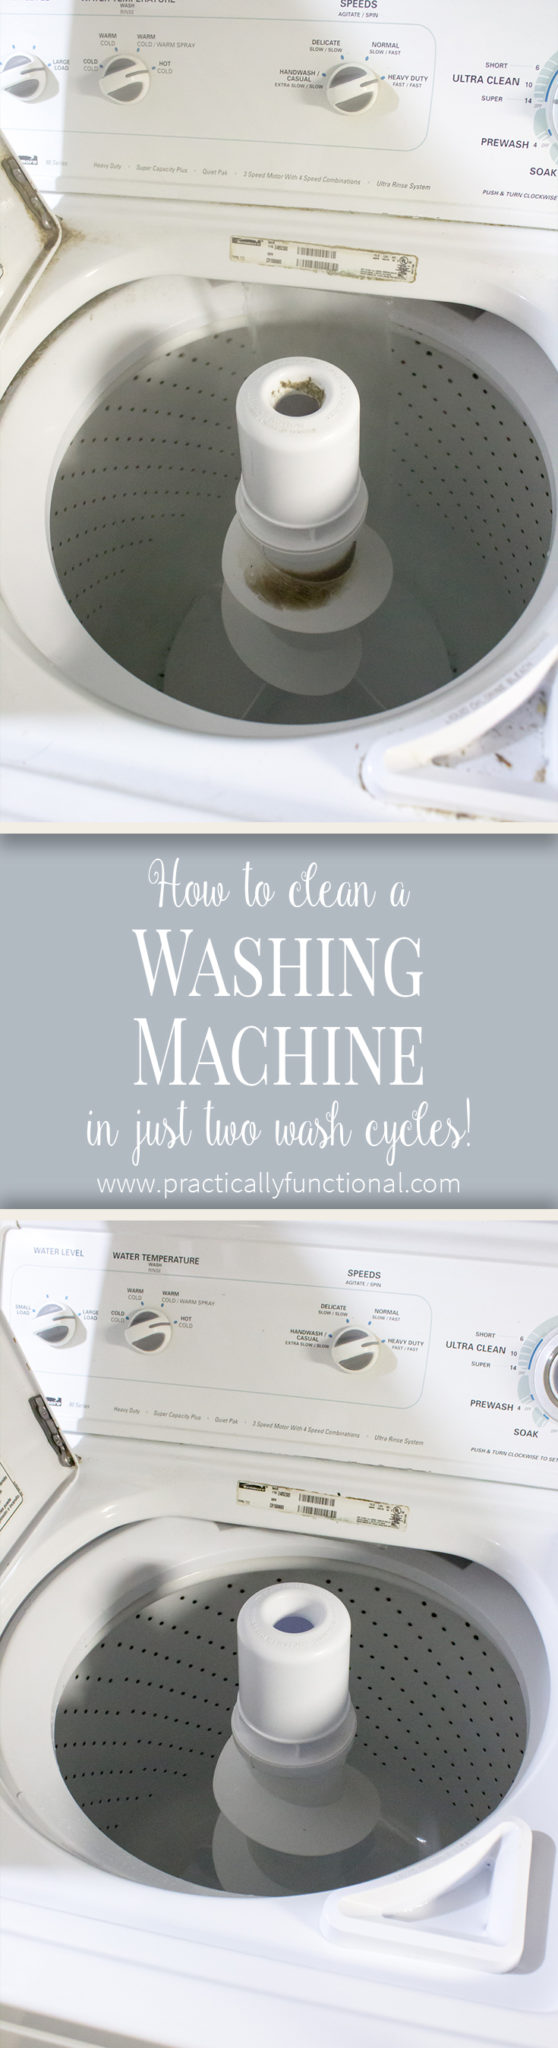 How To Clean A Top Loading Washing Machine With Vinegar And Bleach Practically Functional Pinterest 